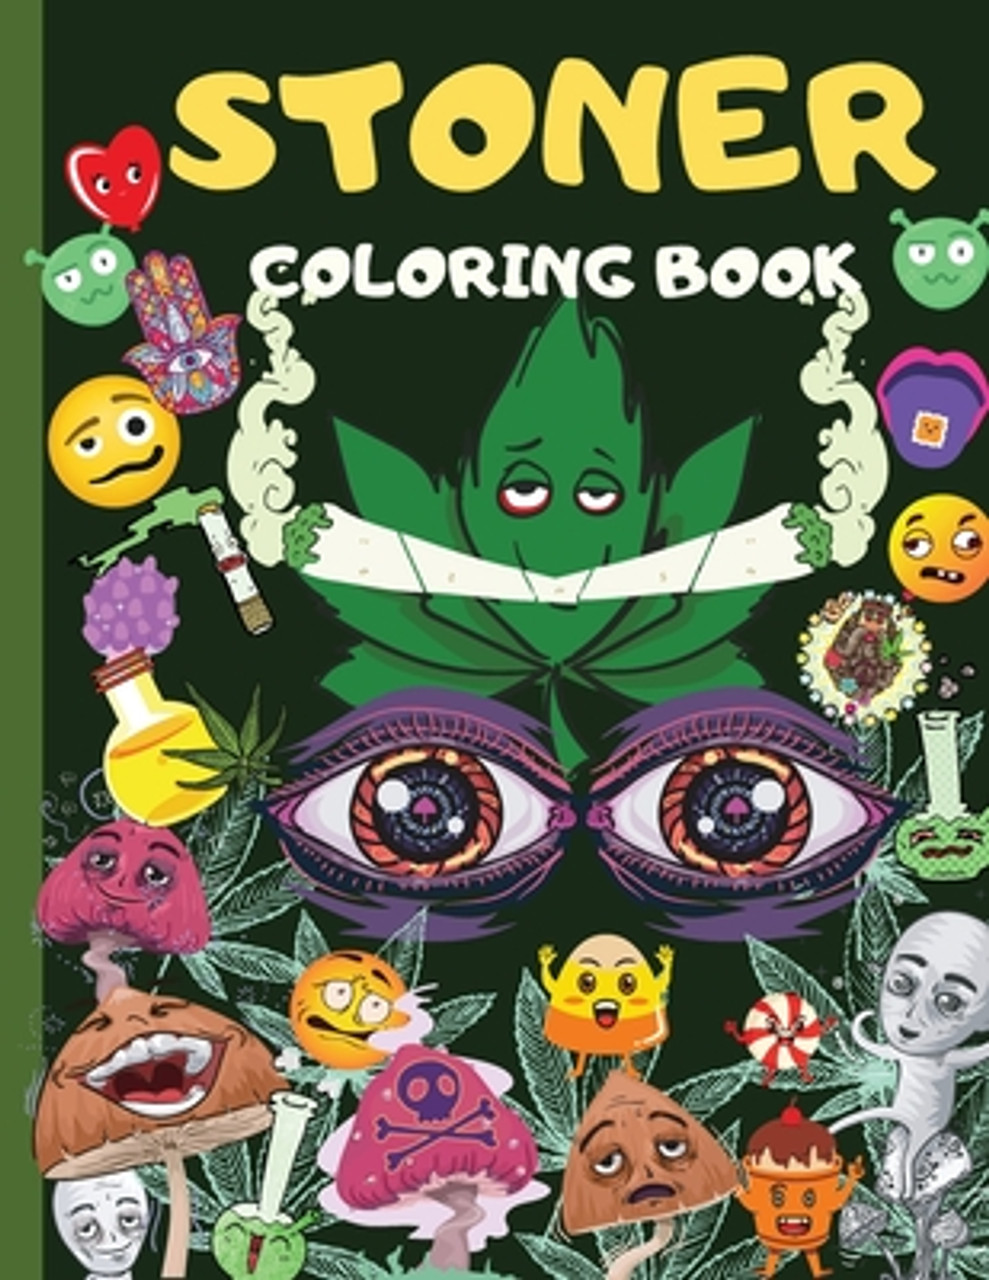 Stoner coloring book amazing weed activity and coloring book for men women marijuana